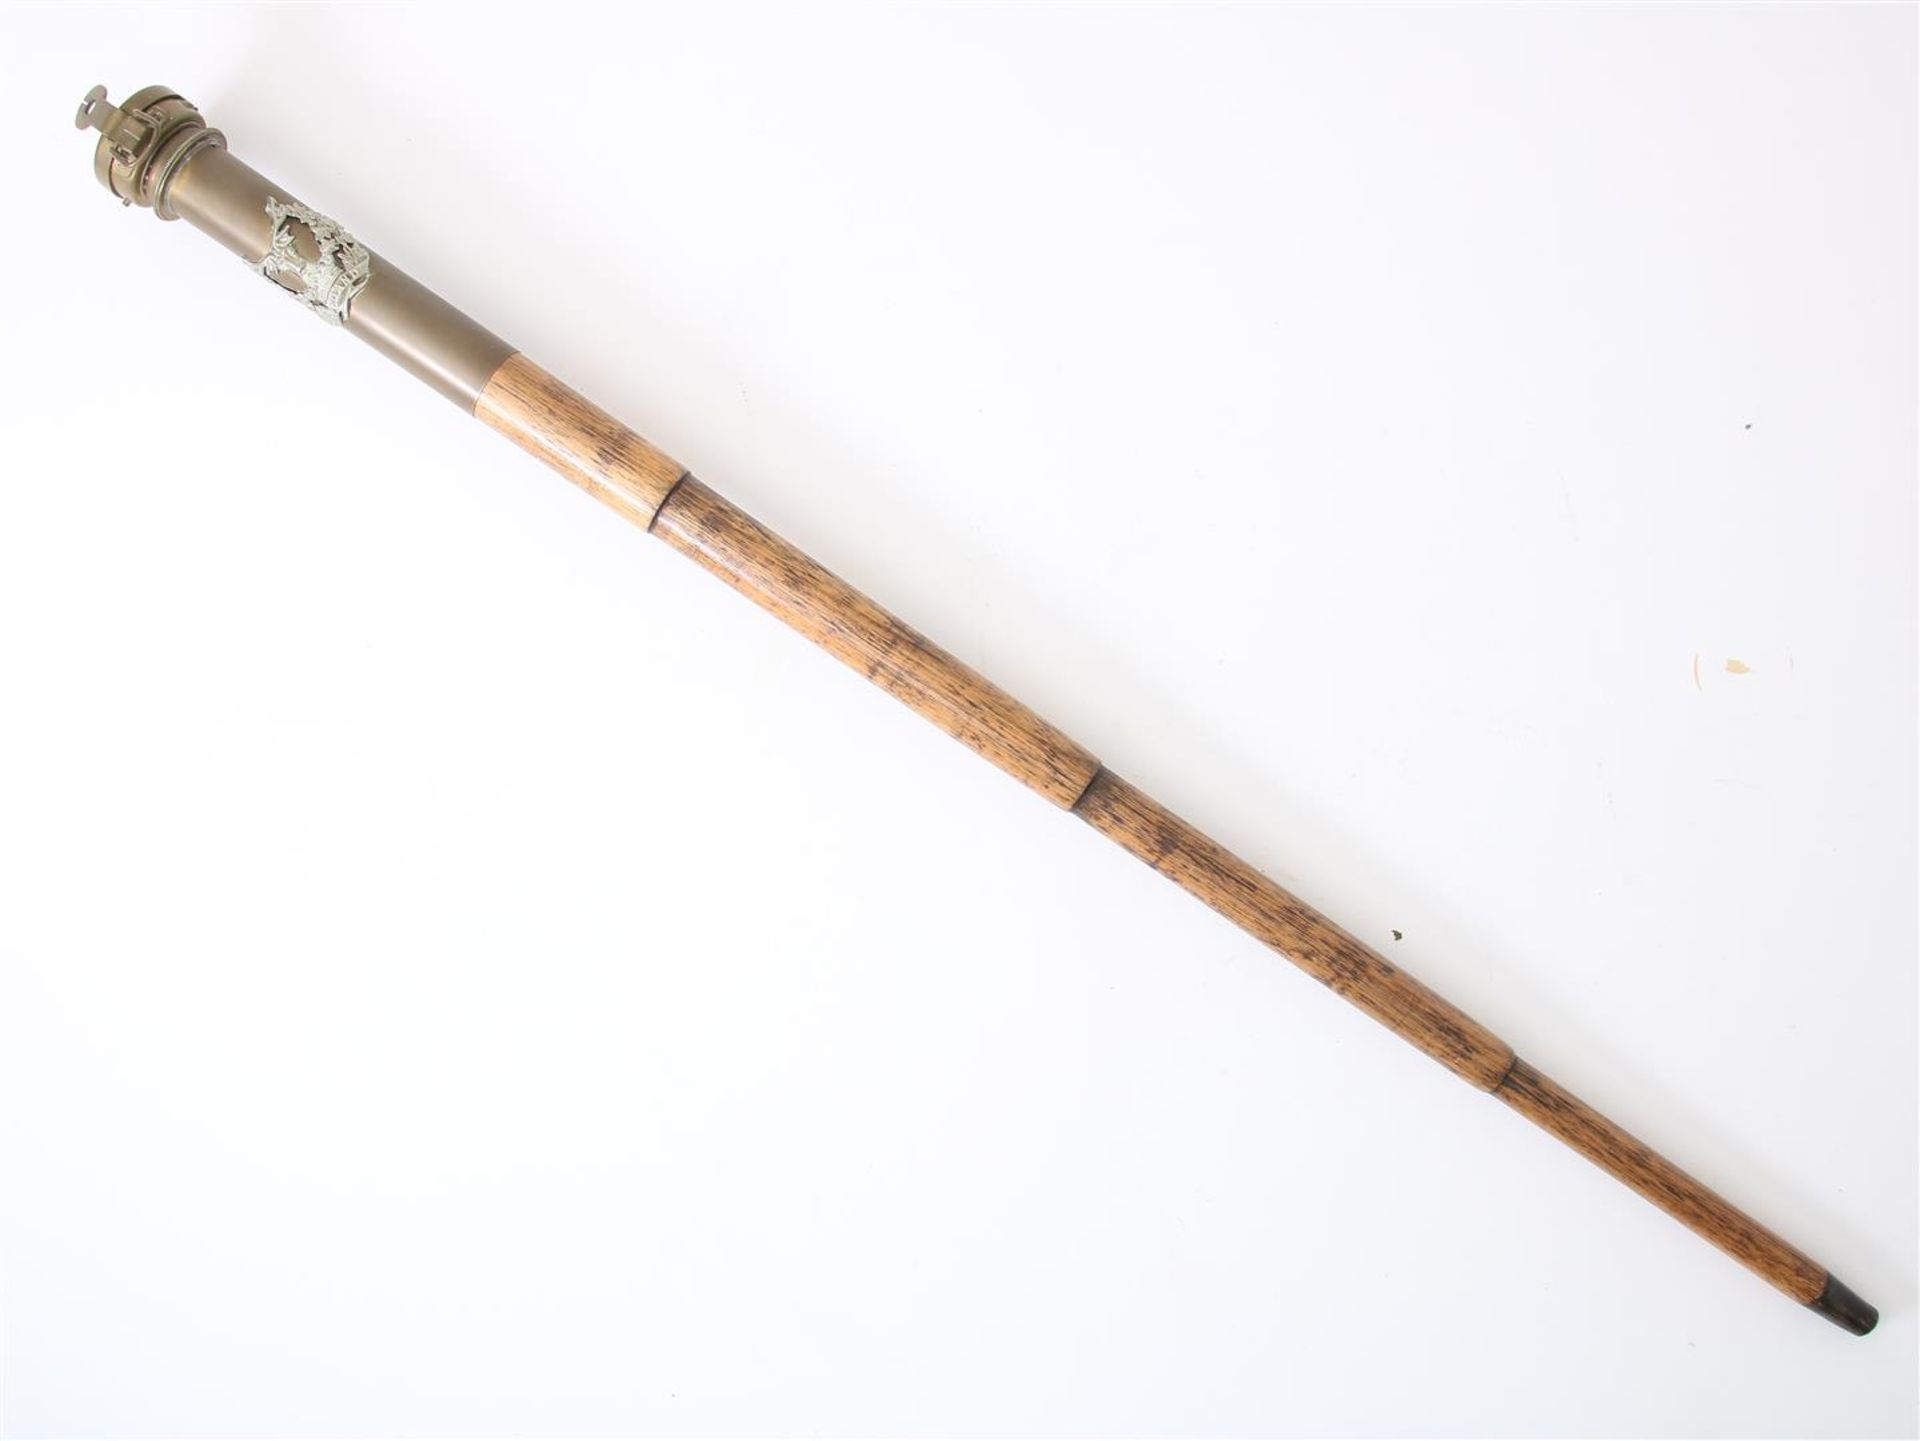 Brass 'marshal staff' with compass and ornament, 20th century, length 97 cm.